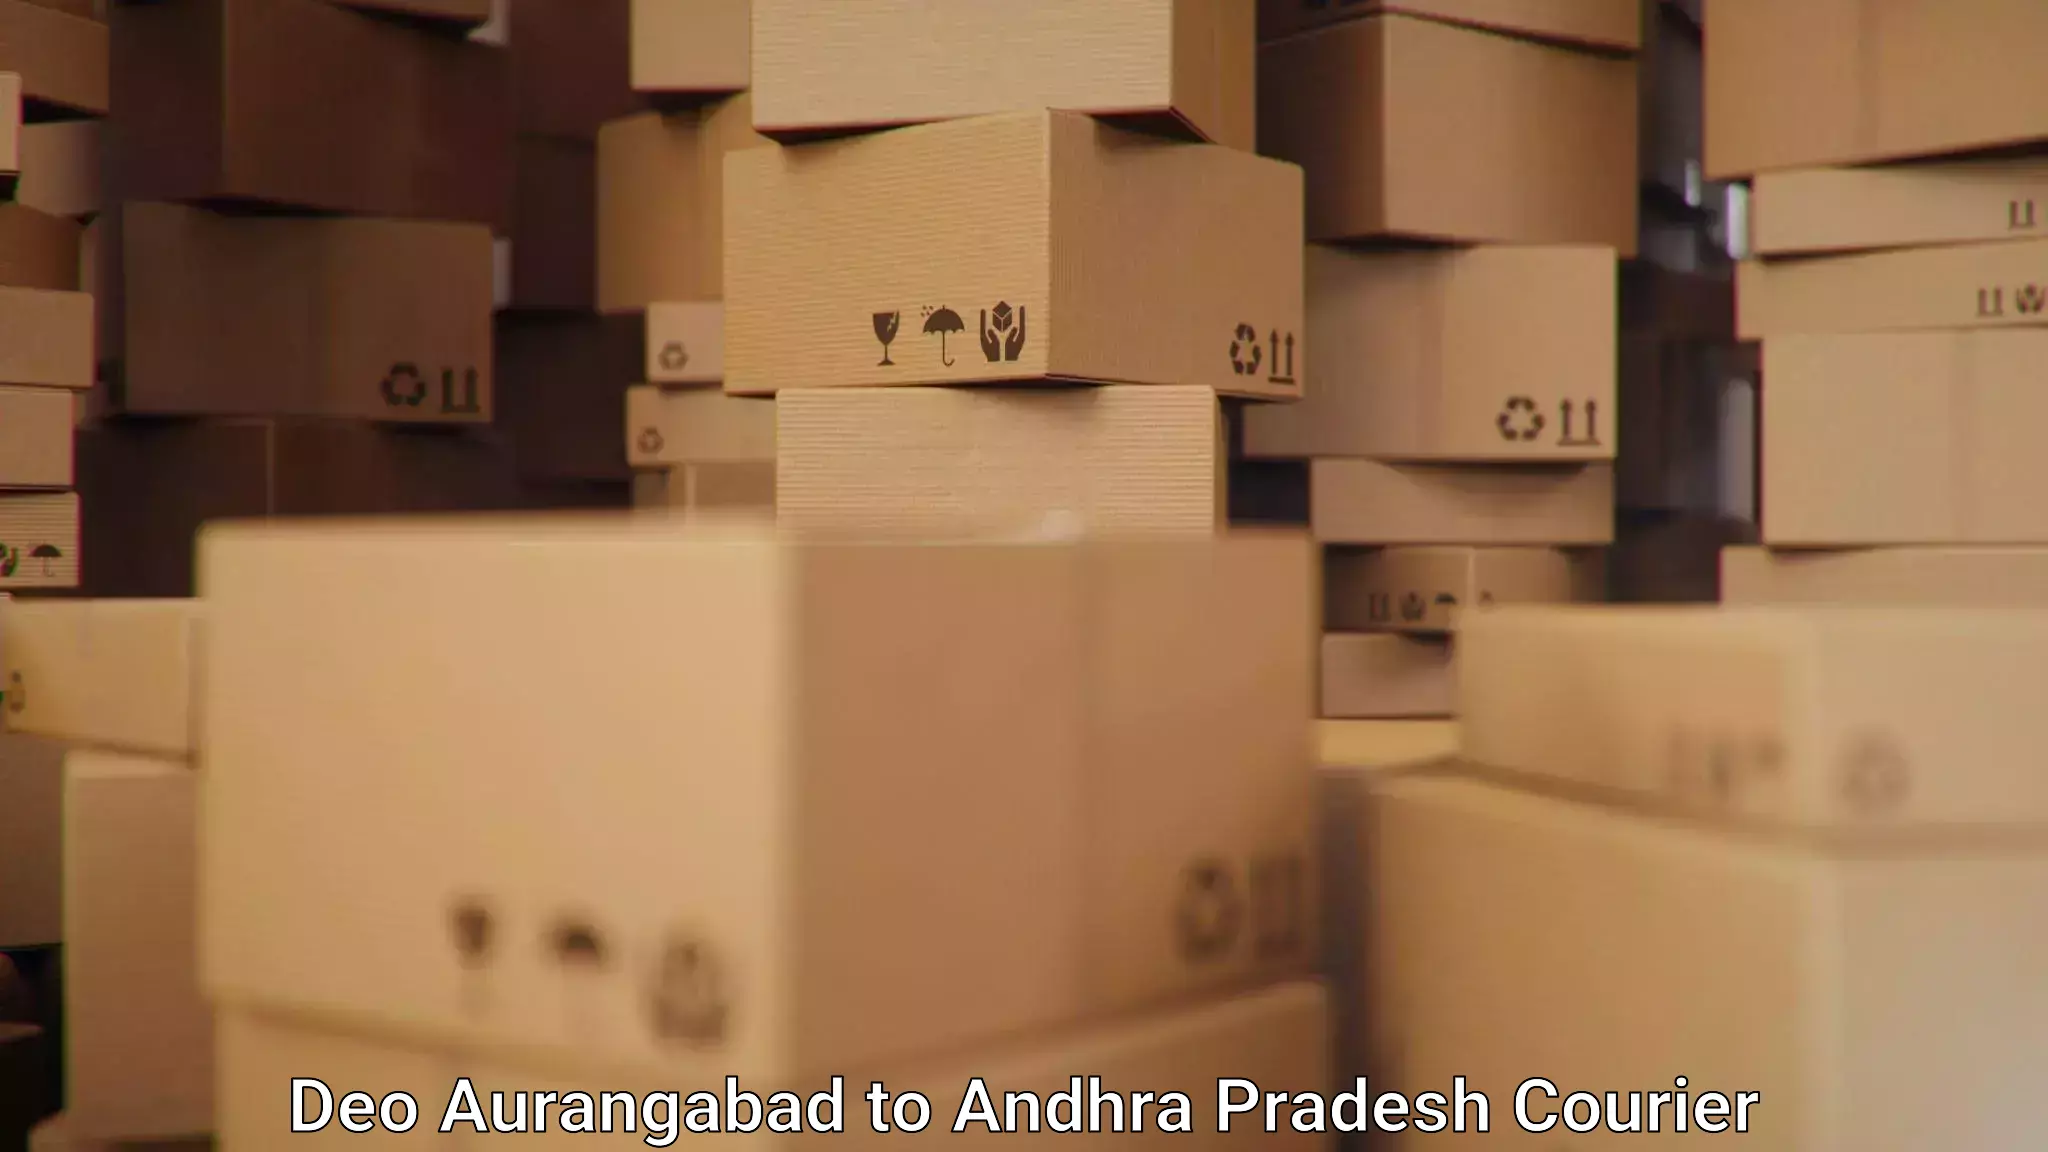 Supply chain delivery Deo Aurangabad to Andhra Pradesh